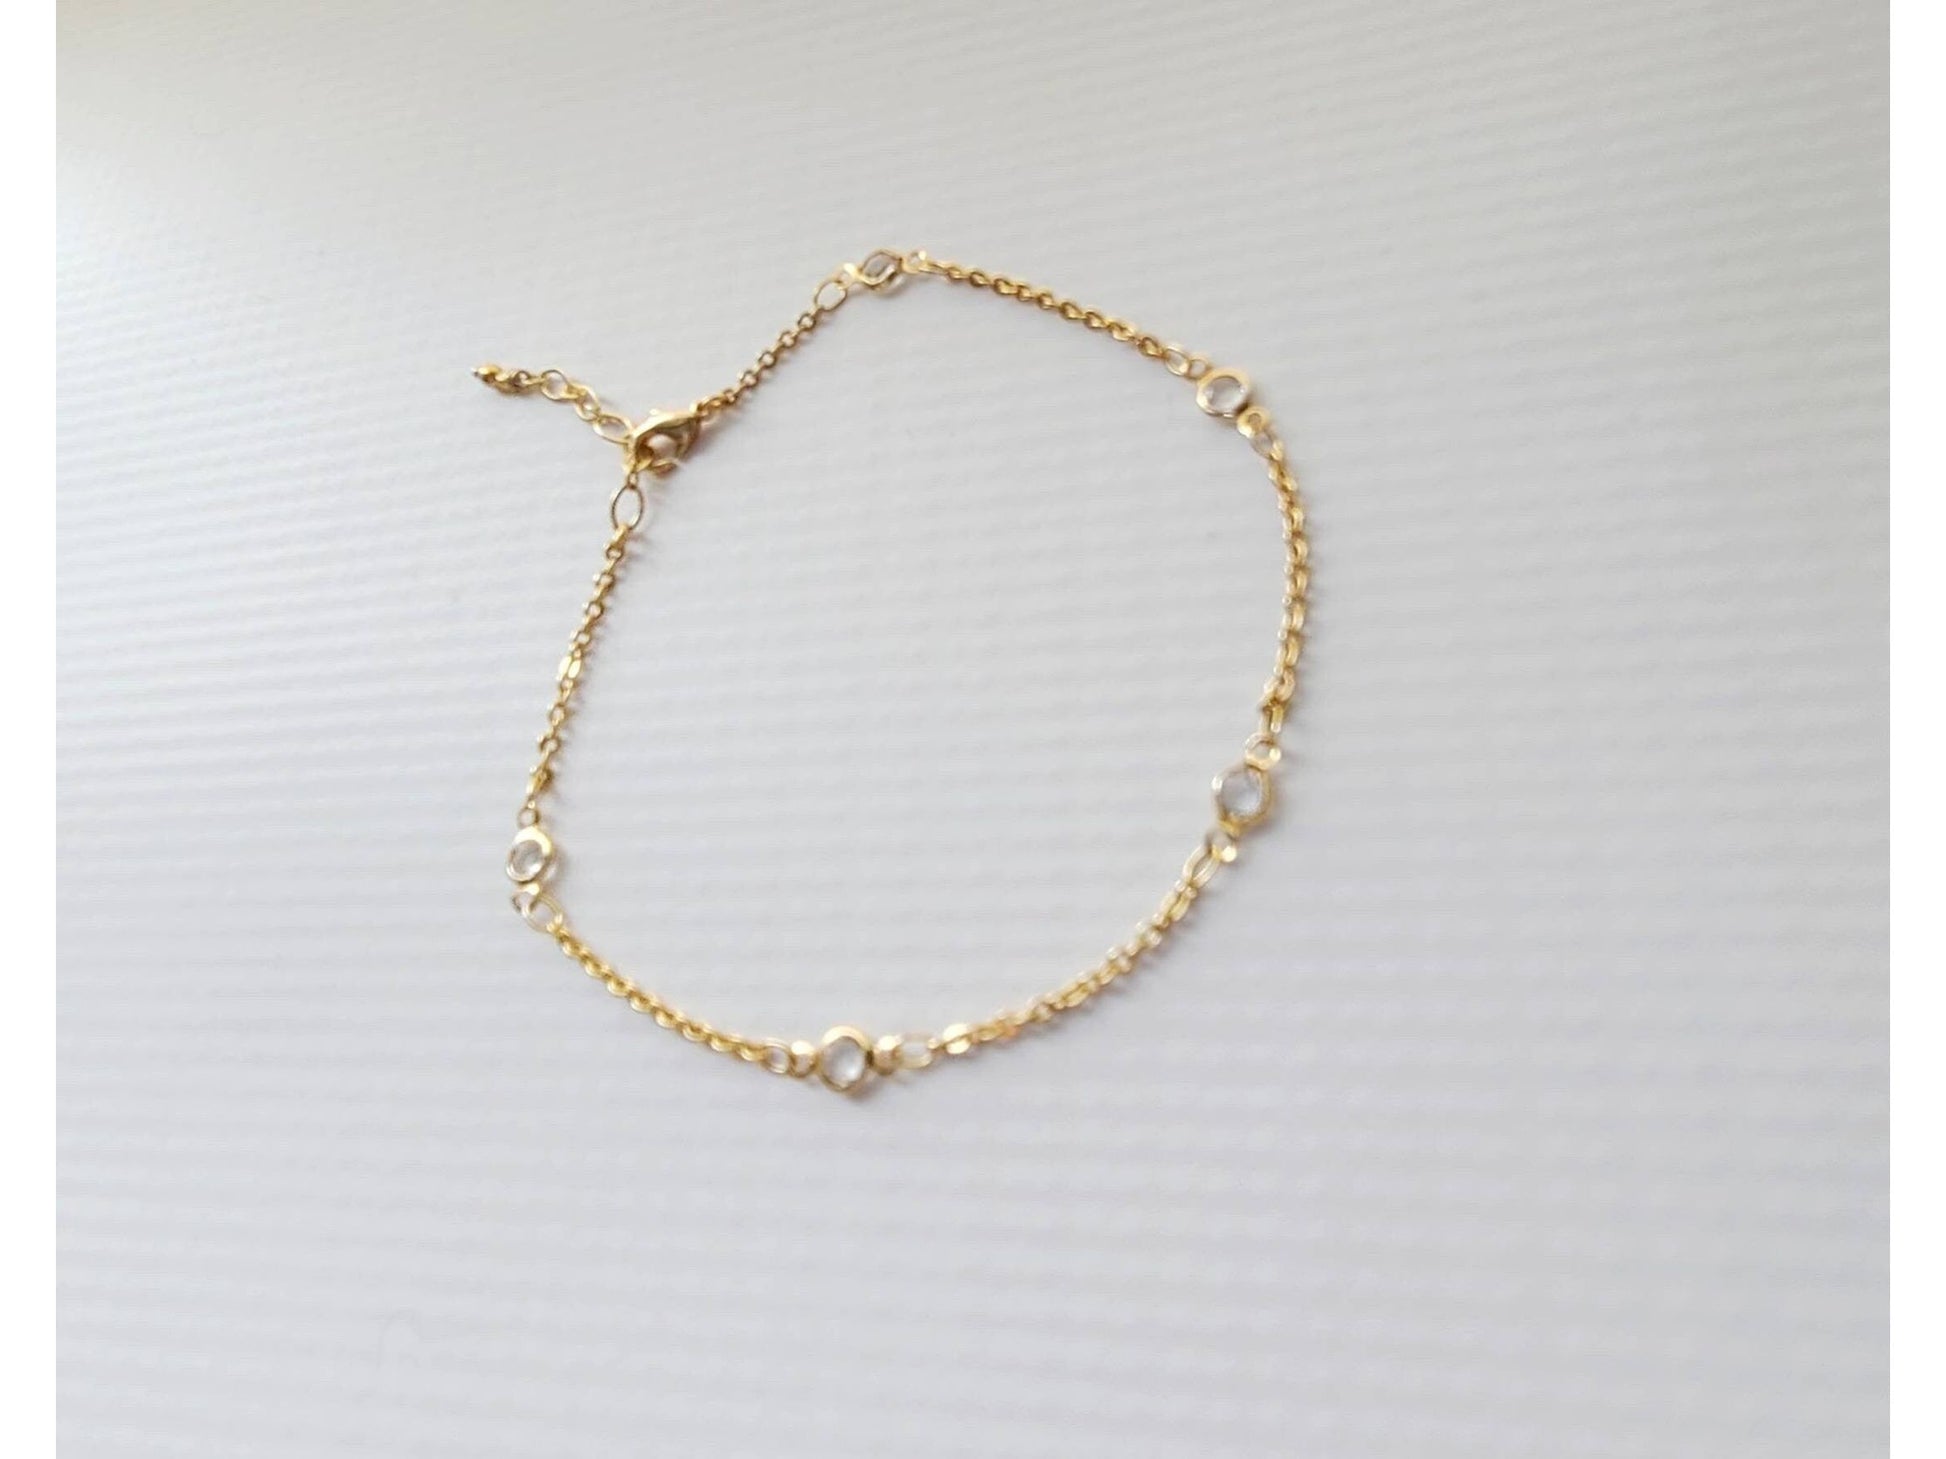 Crystal stations Gold adjustable Anklet, 9 inches with 2 inches extender